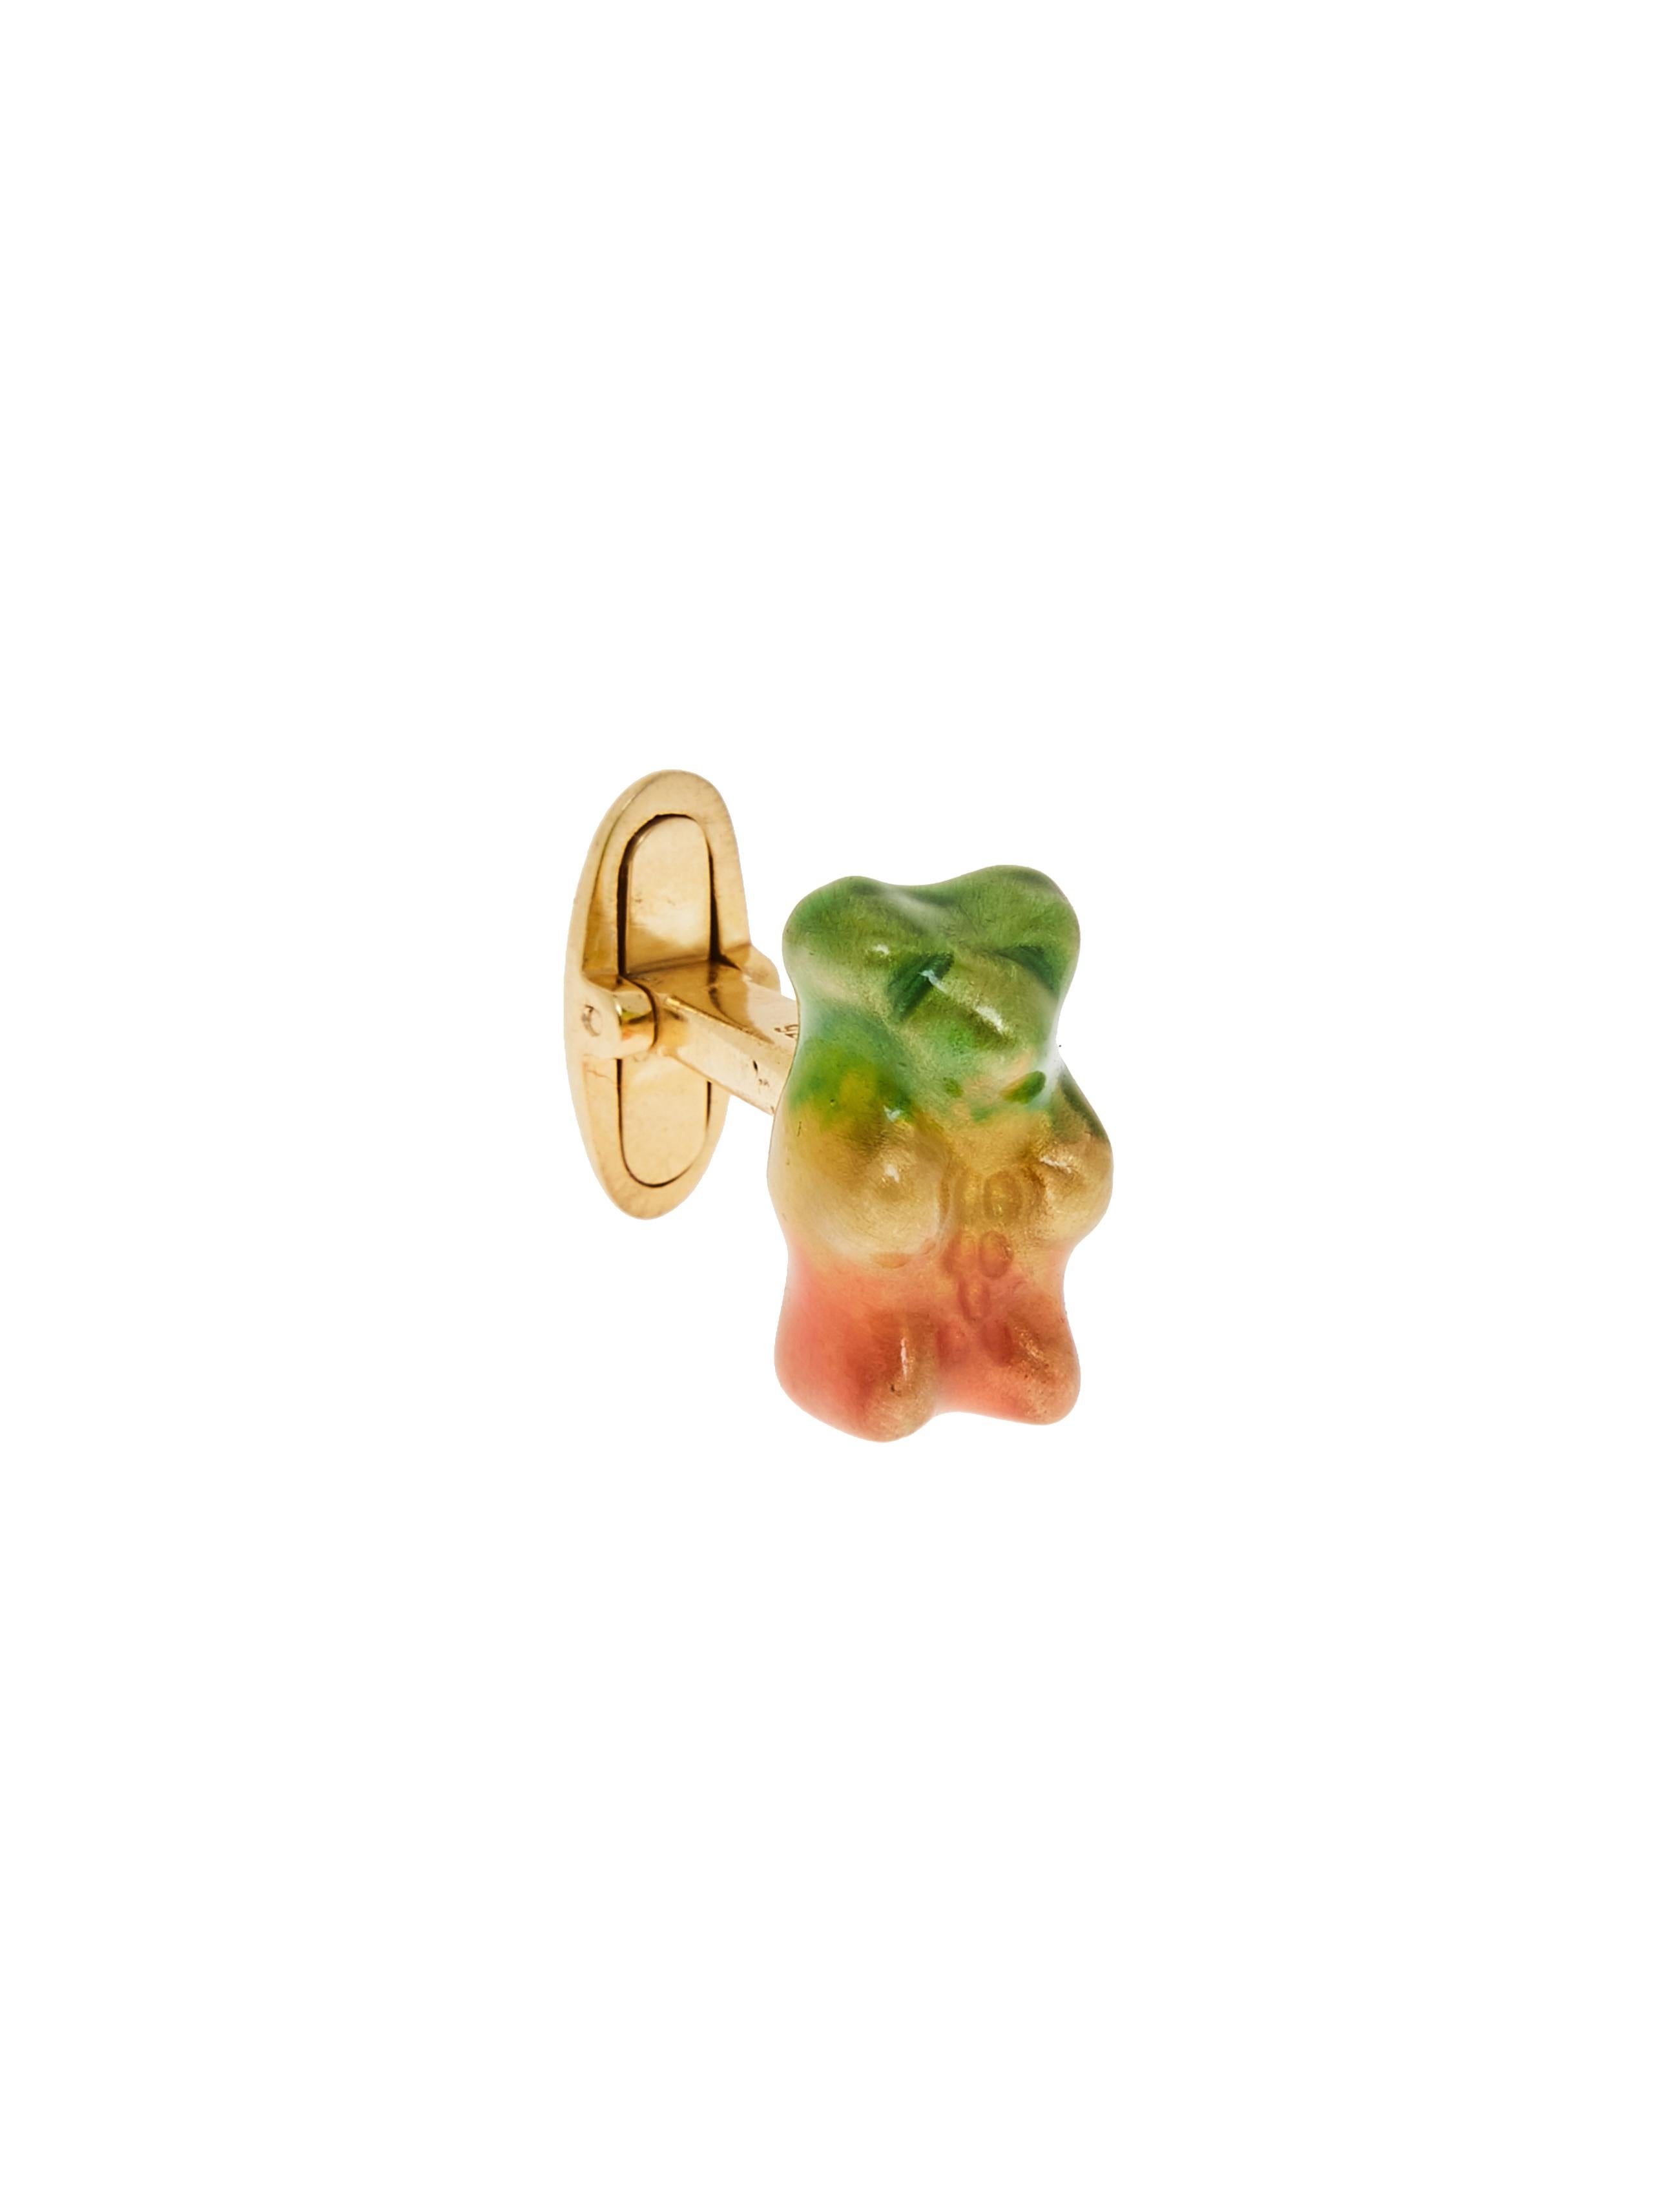  Gummy bear Cufflinks Watermelon 

18K gold plated silver gummy bear cufflinks with transparent green yellow and pink   enamel coverage. 

The Gummy Project by Maggoosh is a capsule collection inspired by the designer's life in New York City and her